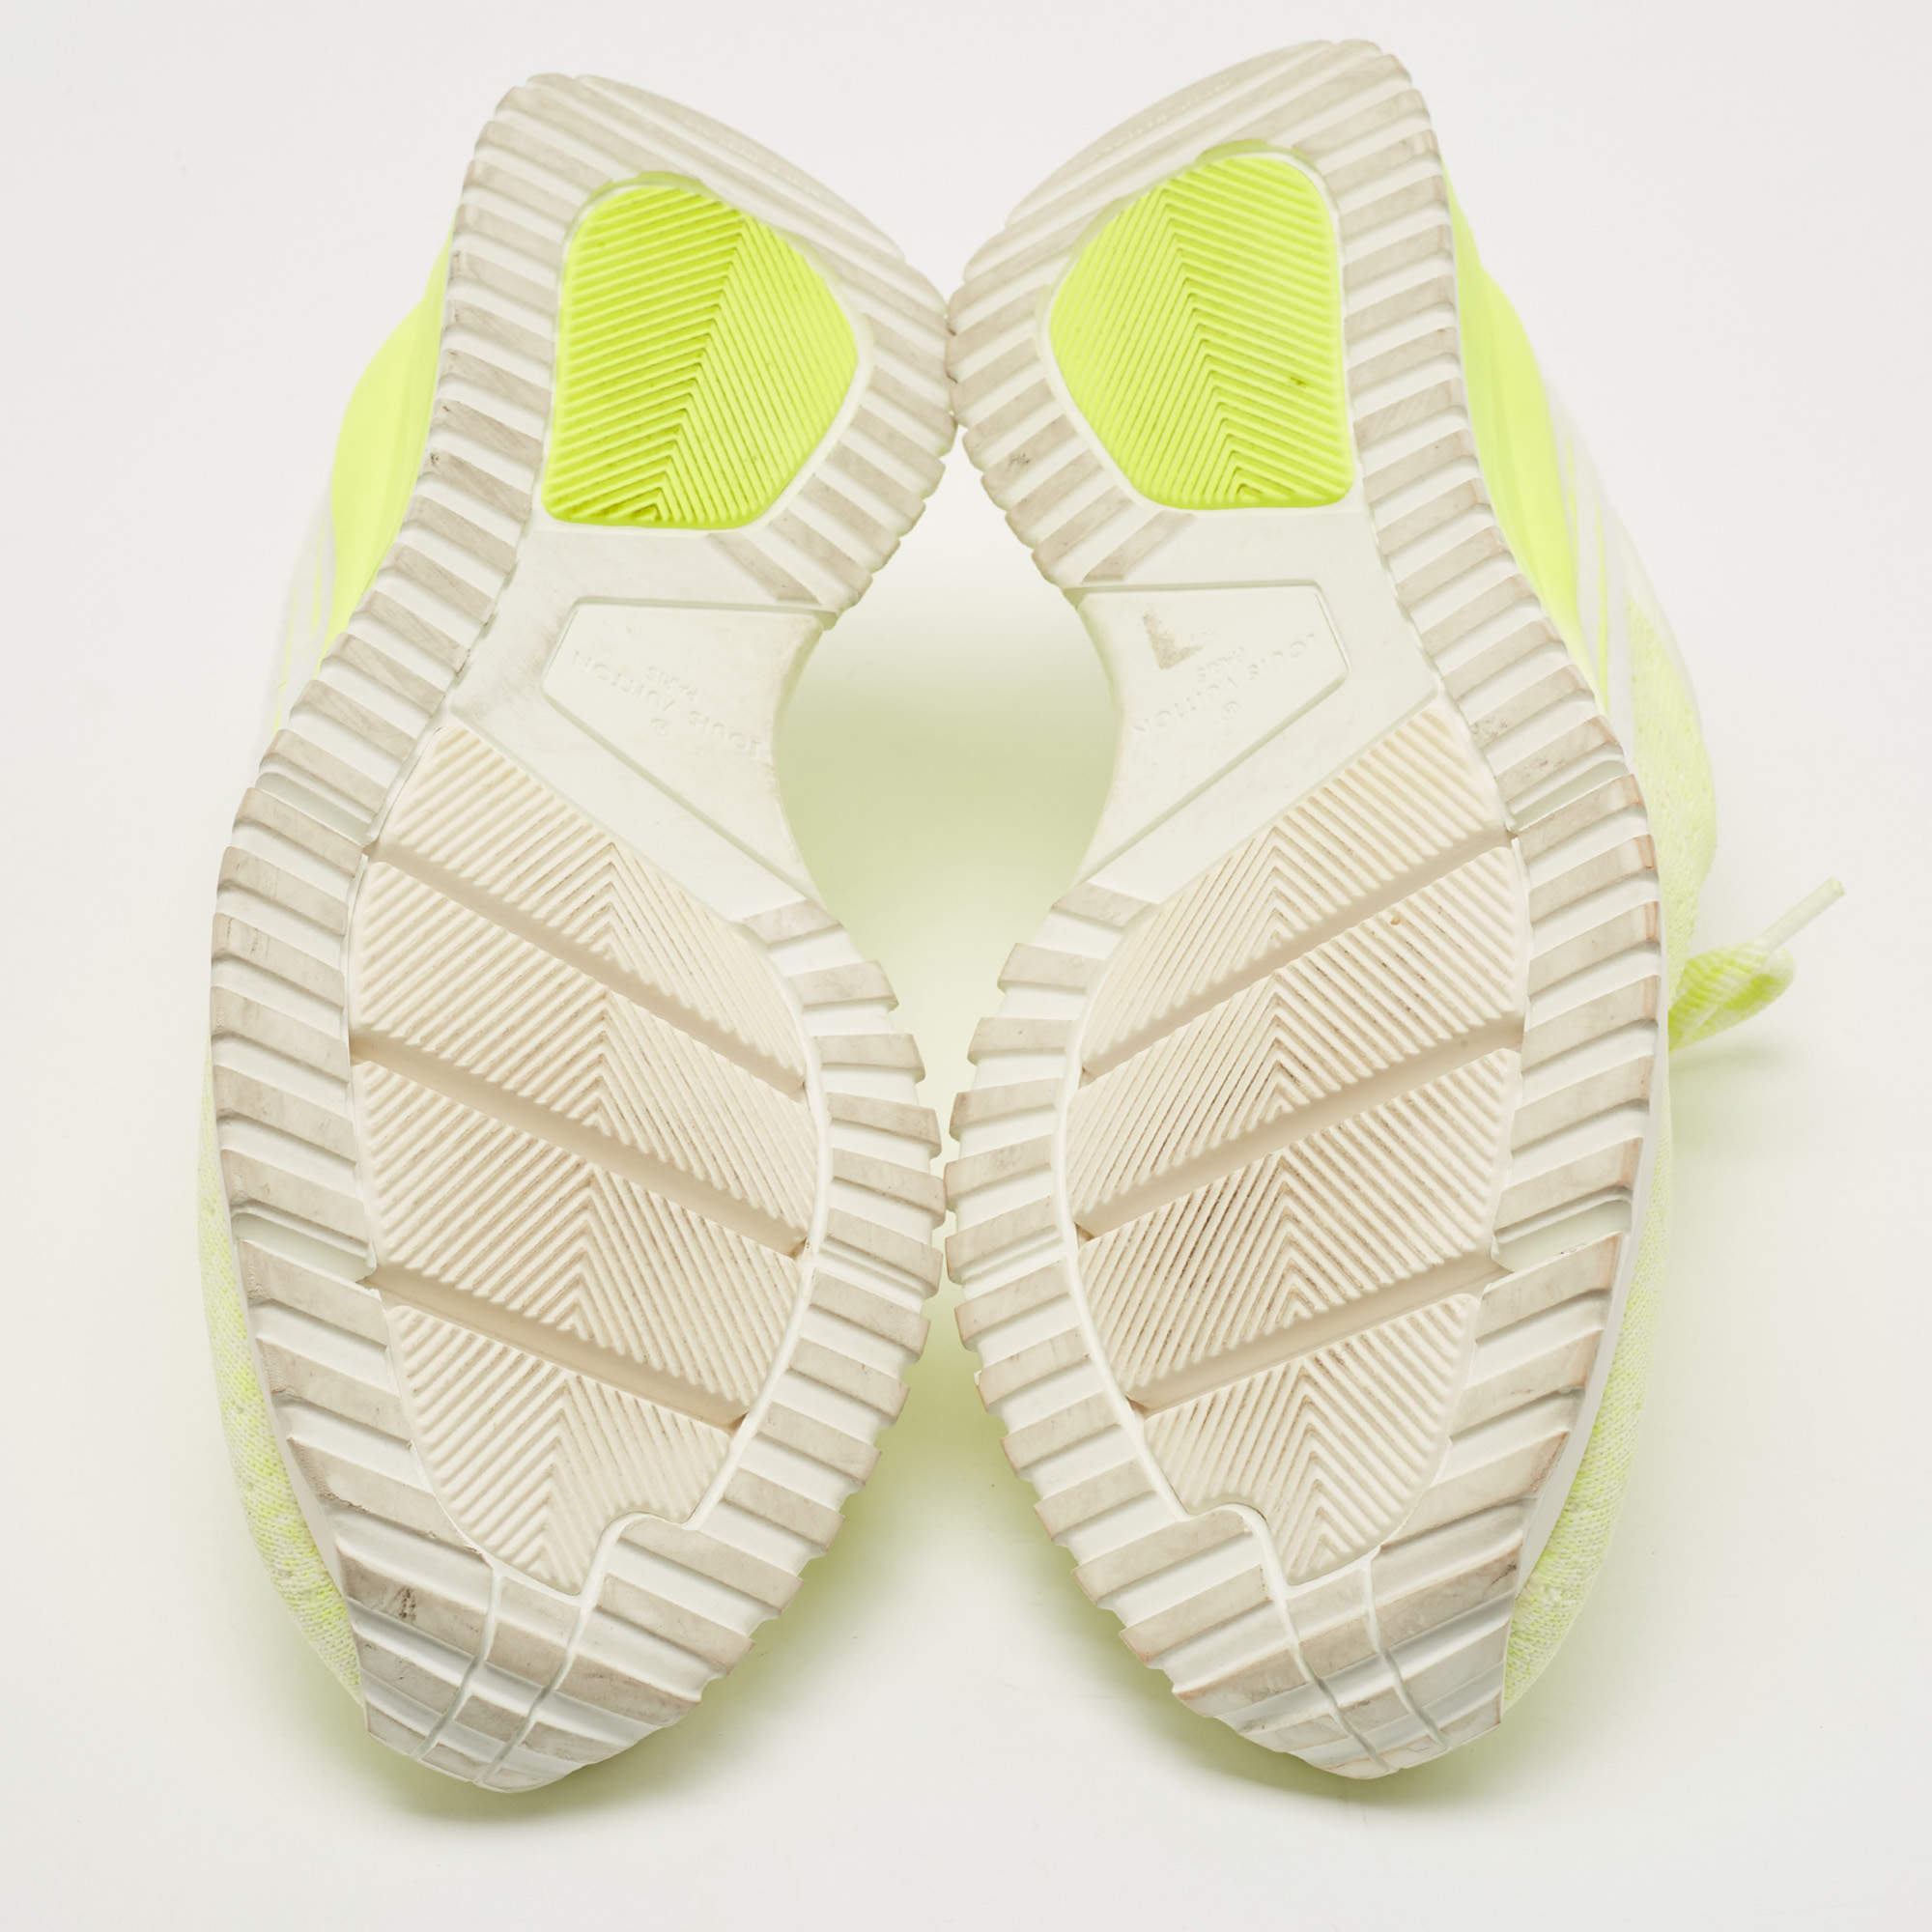 Louis Vuitton Neon Yellow Knit Fabric V.N.R Sneakers Size 41 at